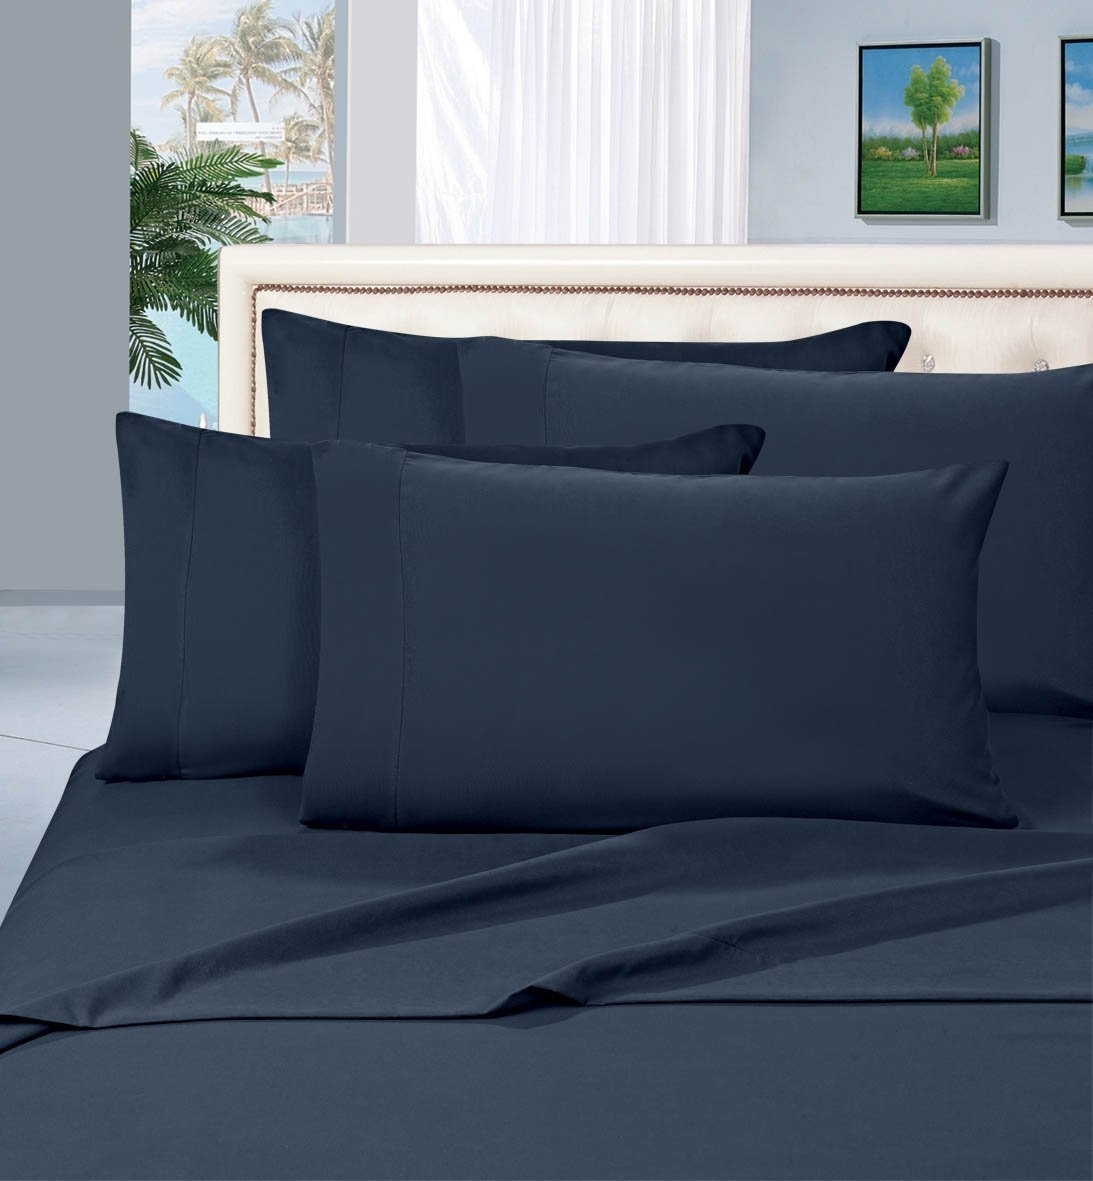 Elegant Comfort 1500 Series Wrinkle Resistant Egyptian Quality Hypoallergenic Ultra Soft Luxury 4-piece Bed Sheet Set, Full, Navy Blue